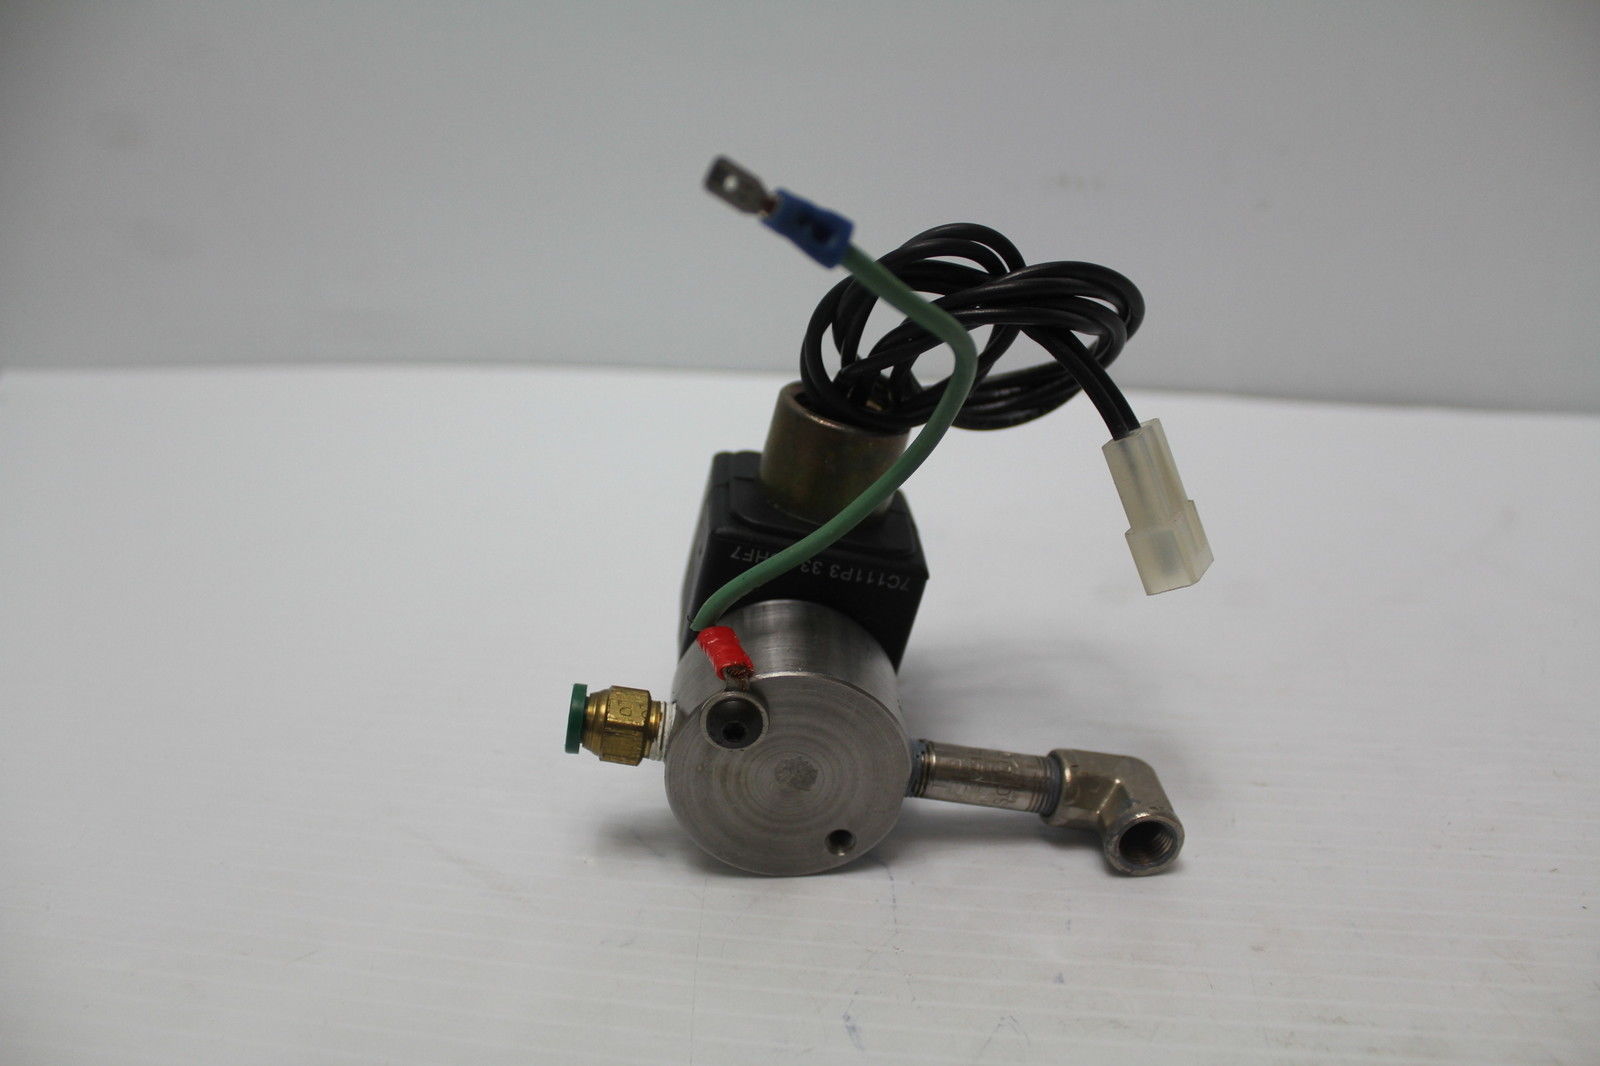 Parker 71215SN1MN00N0C111P3 Solenoid Valve and 50 similar items